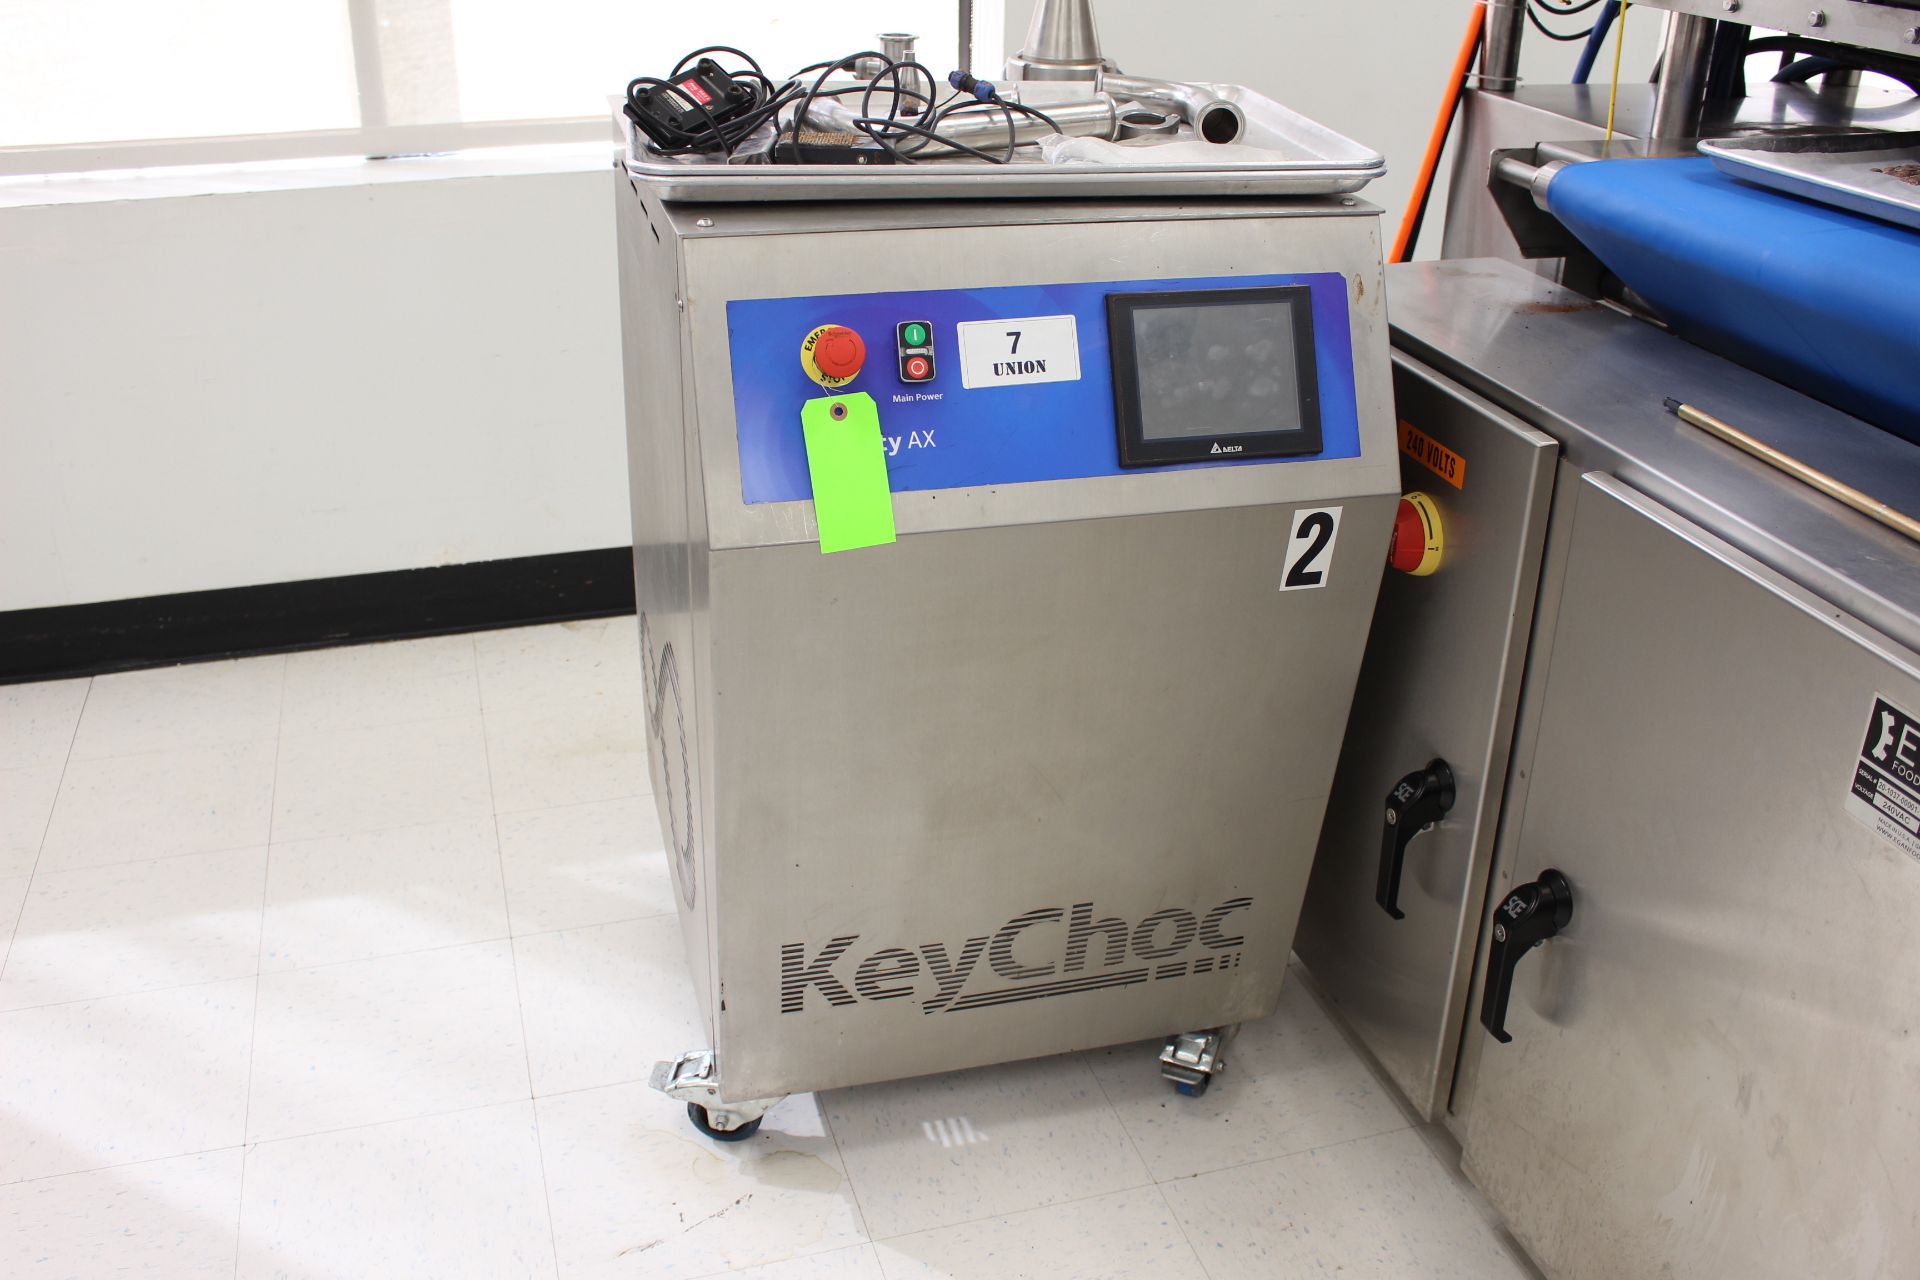 Keychoc Infinity AX 60-kg Stainless Steel Automatic Tempering Machine serial#4549-Infinity-AX-